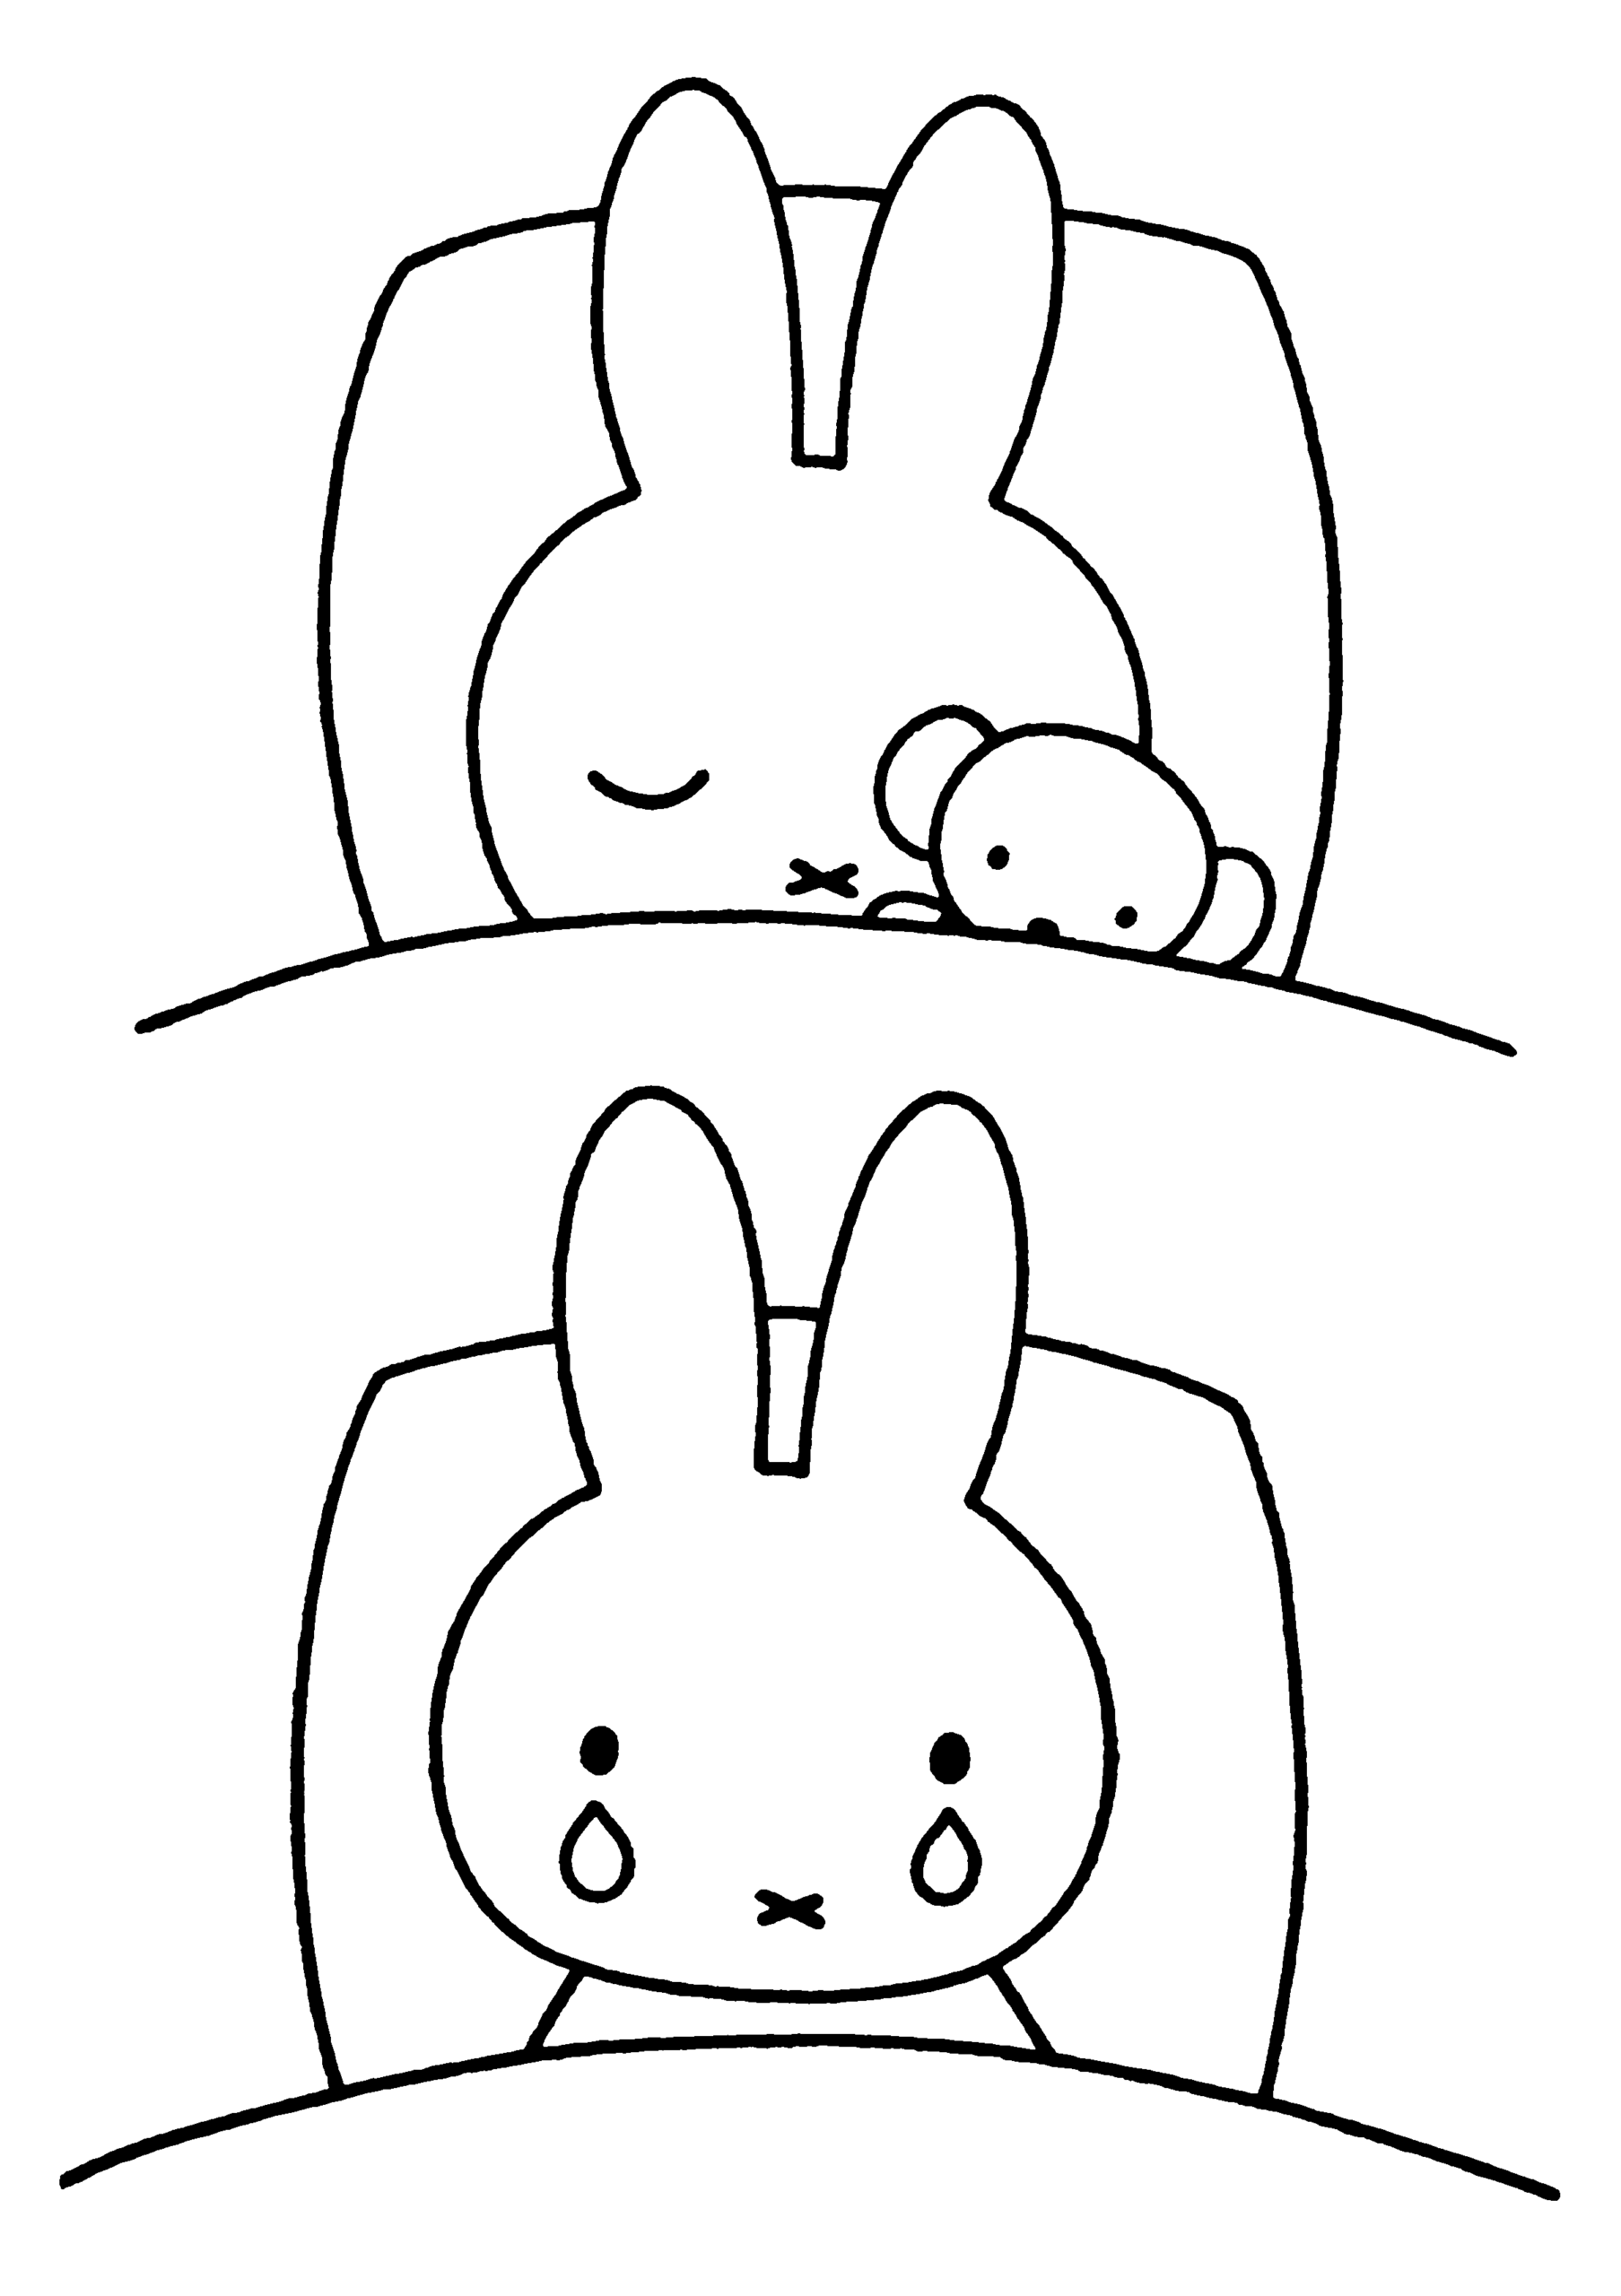 Miffy Coloring Pages Cartoons miffy 5 Printable 2020 4201 Coloring4free